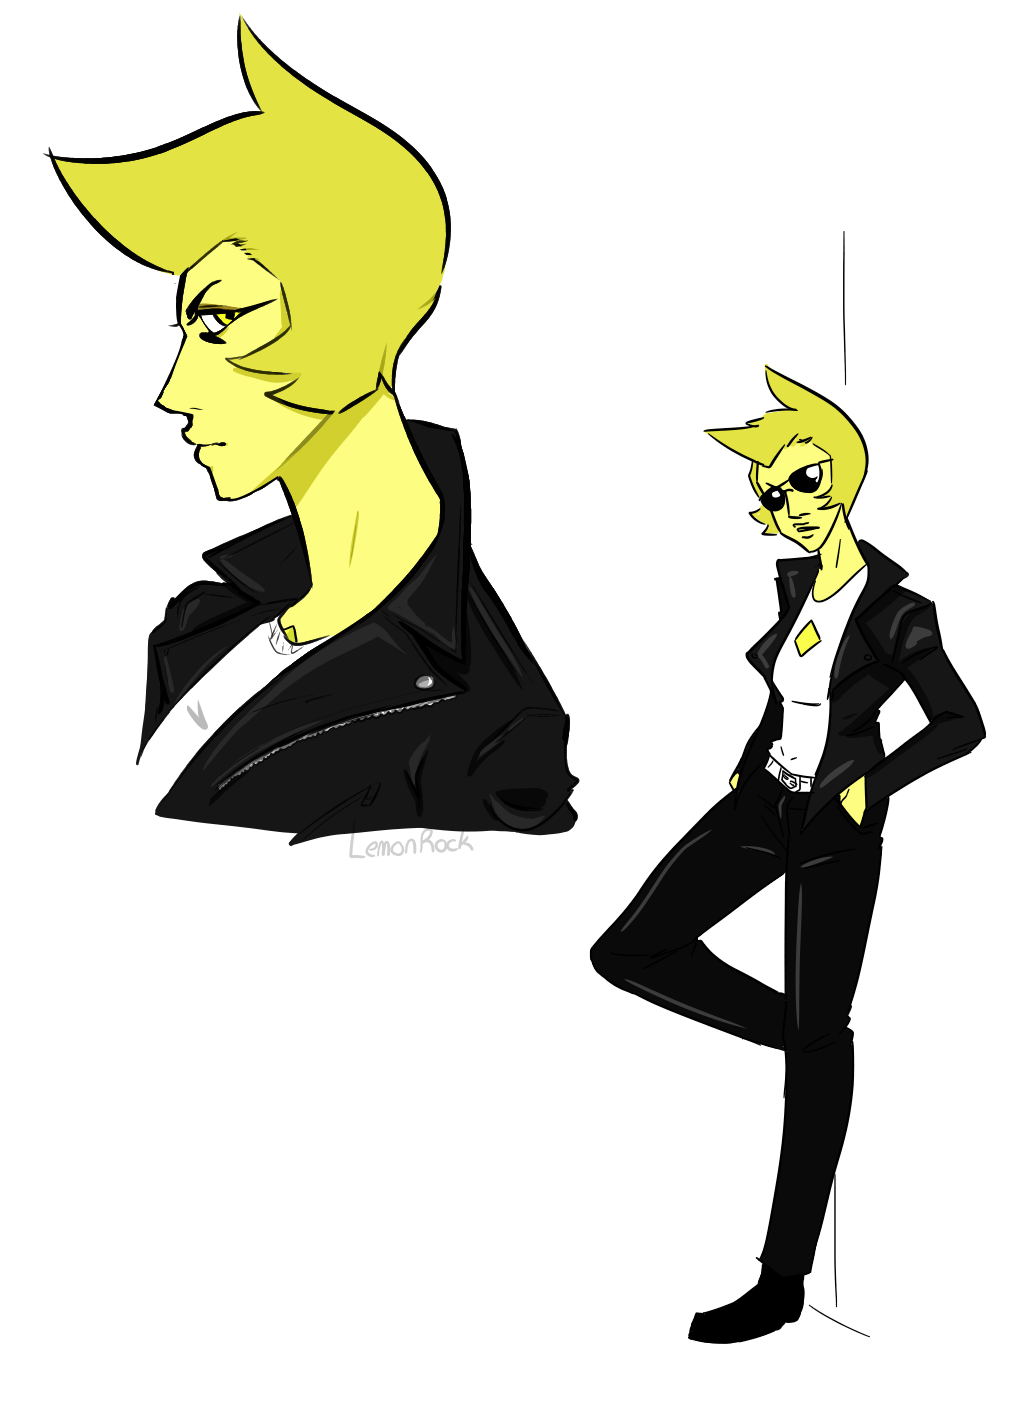 I was doodling and accidentally made yellow look like a greaser so I just rolled with it